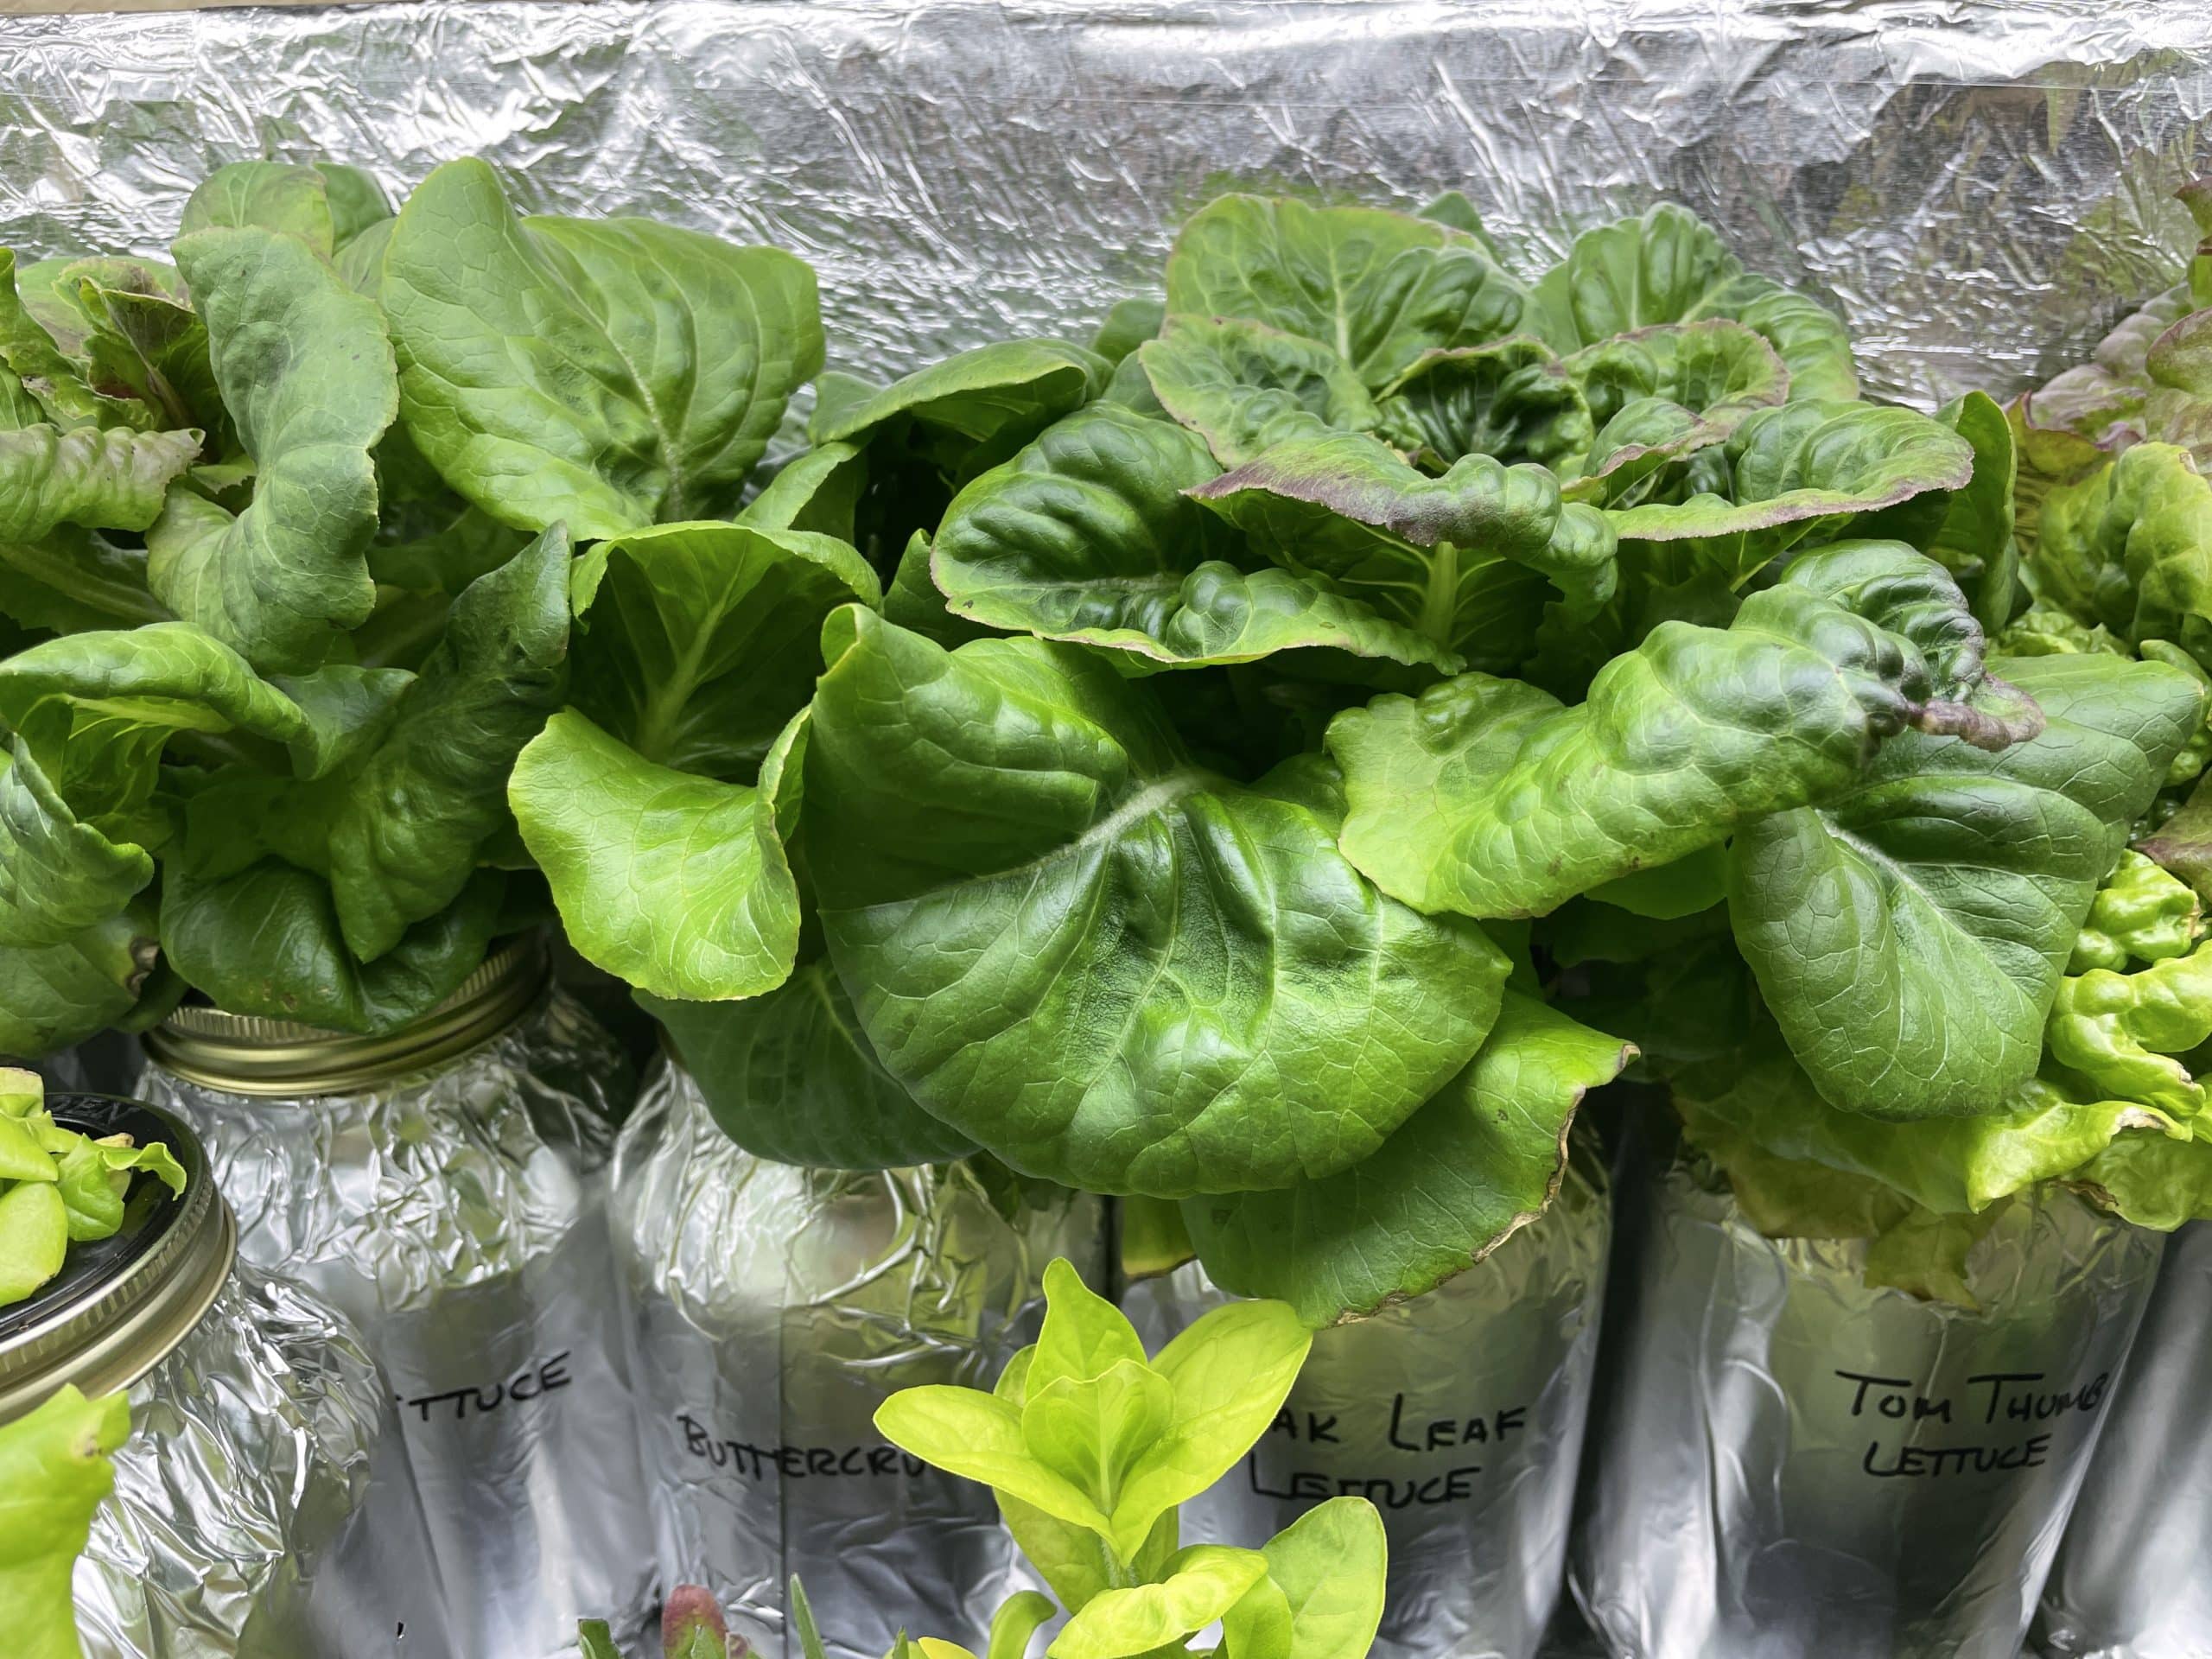 Hydroponic Gardening - Everything You Need to Know